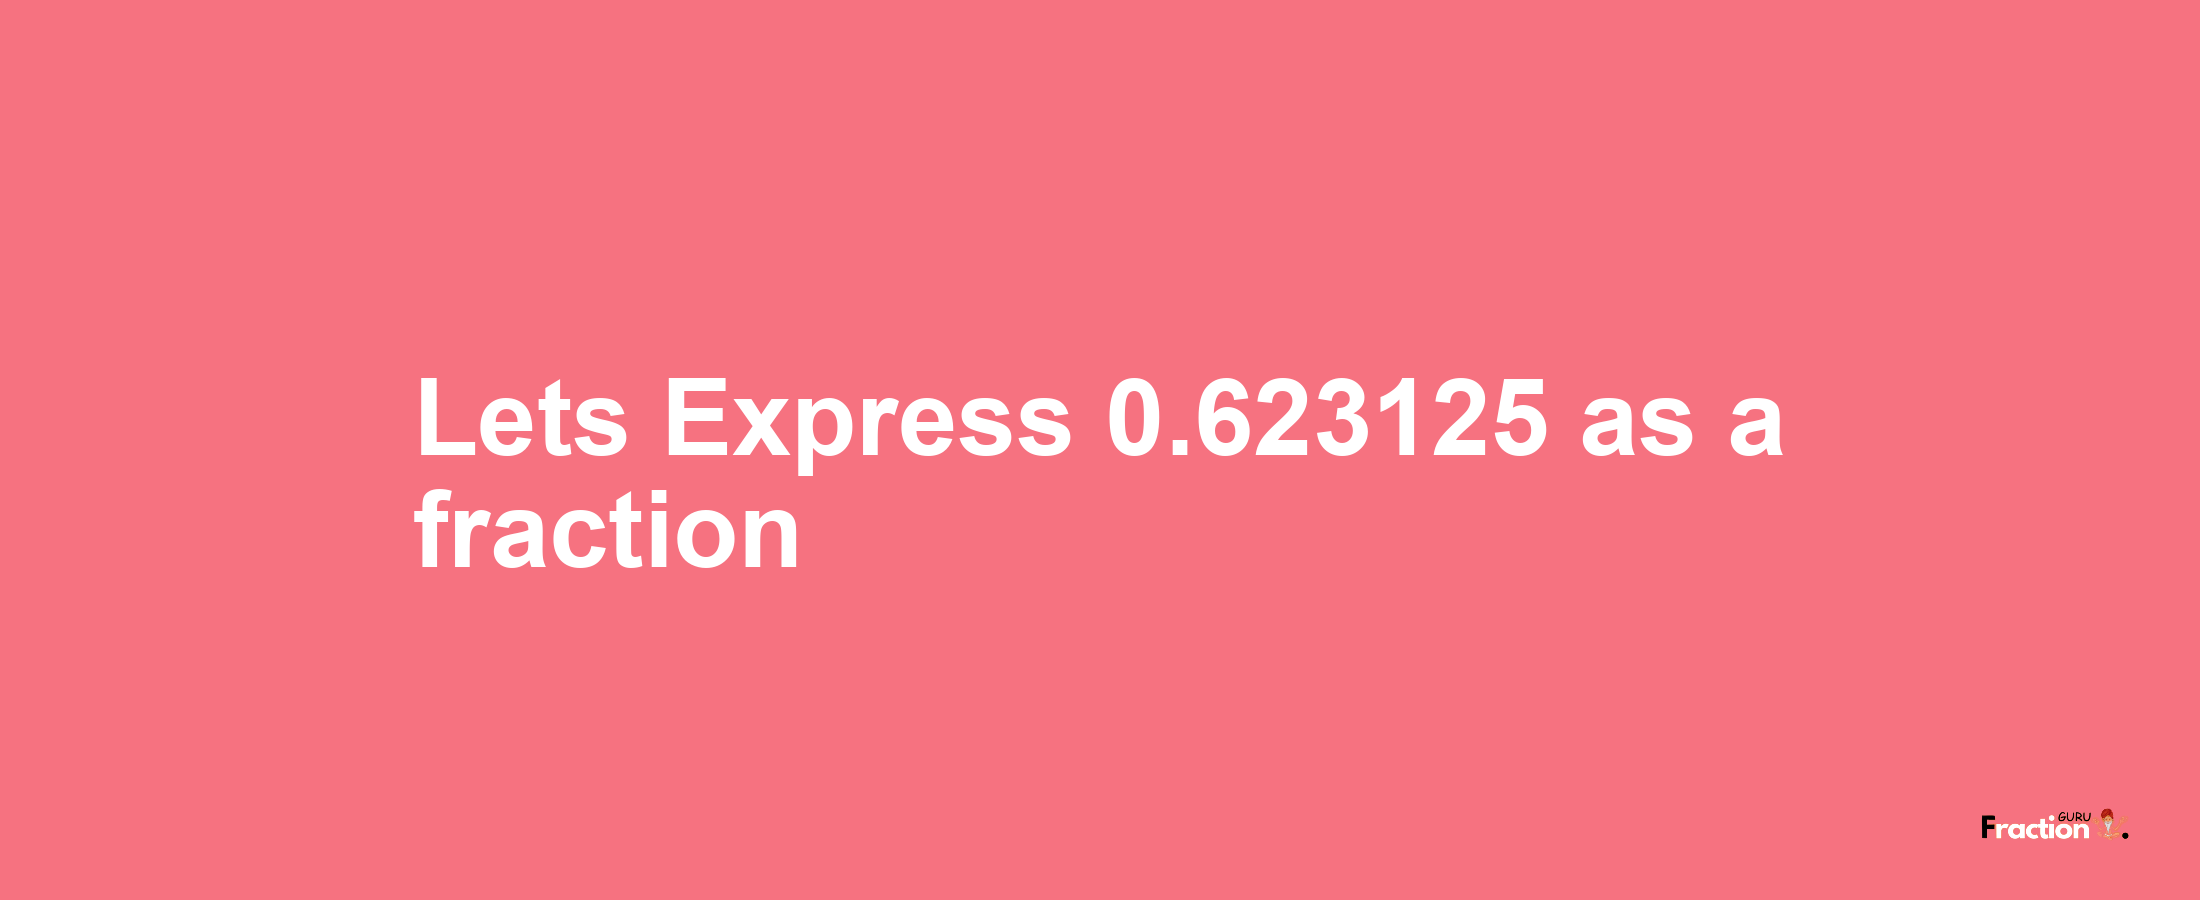 Lets Express 0.623125 as afraction